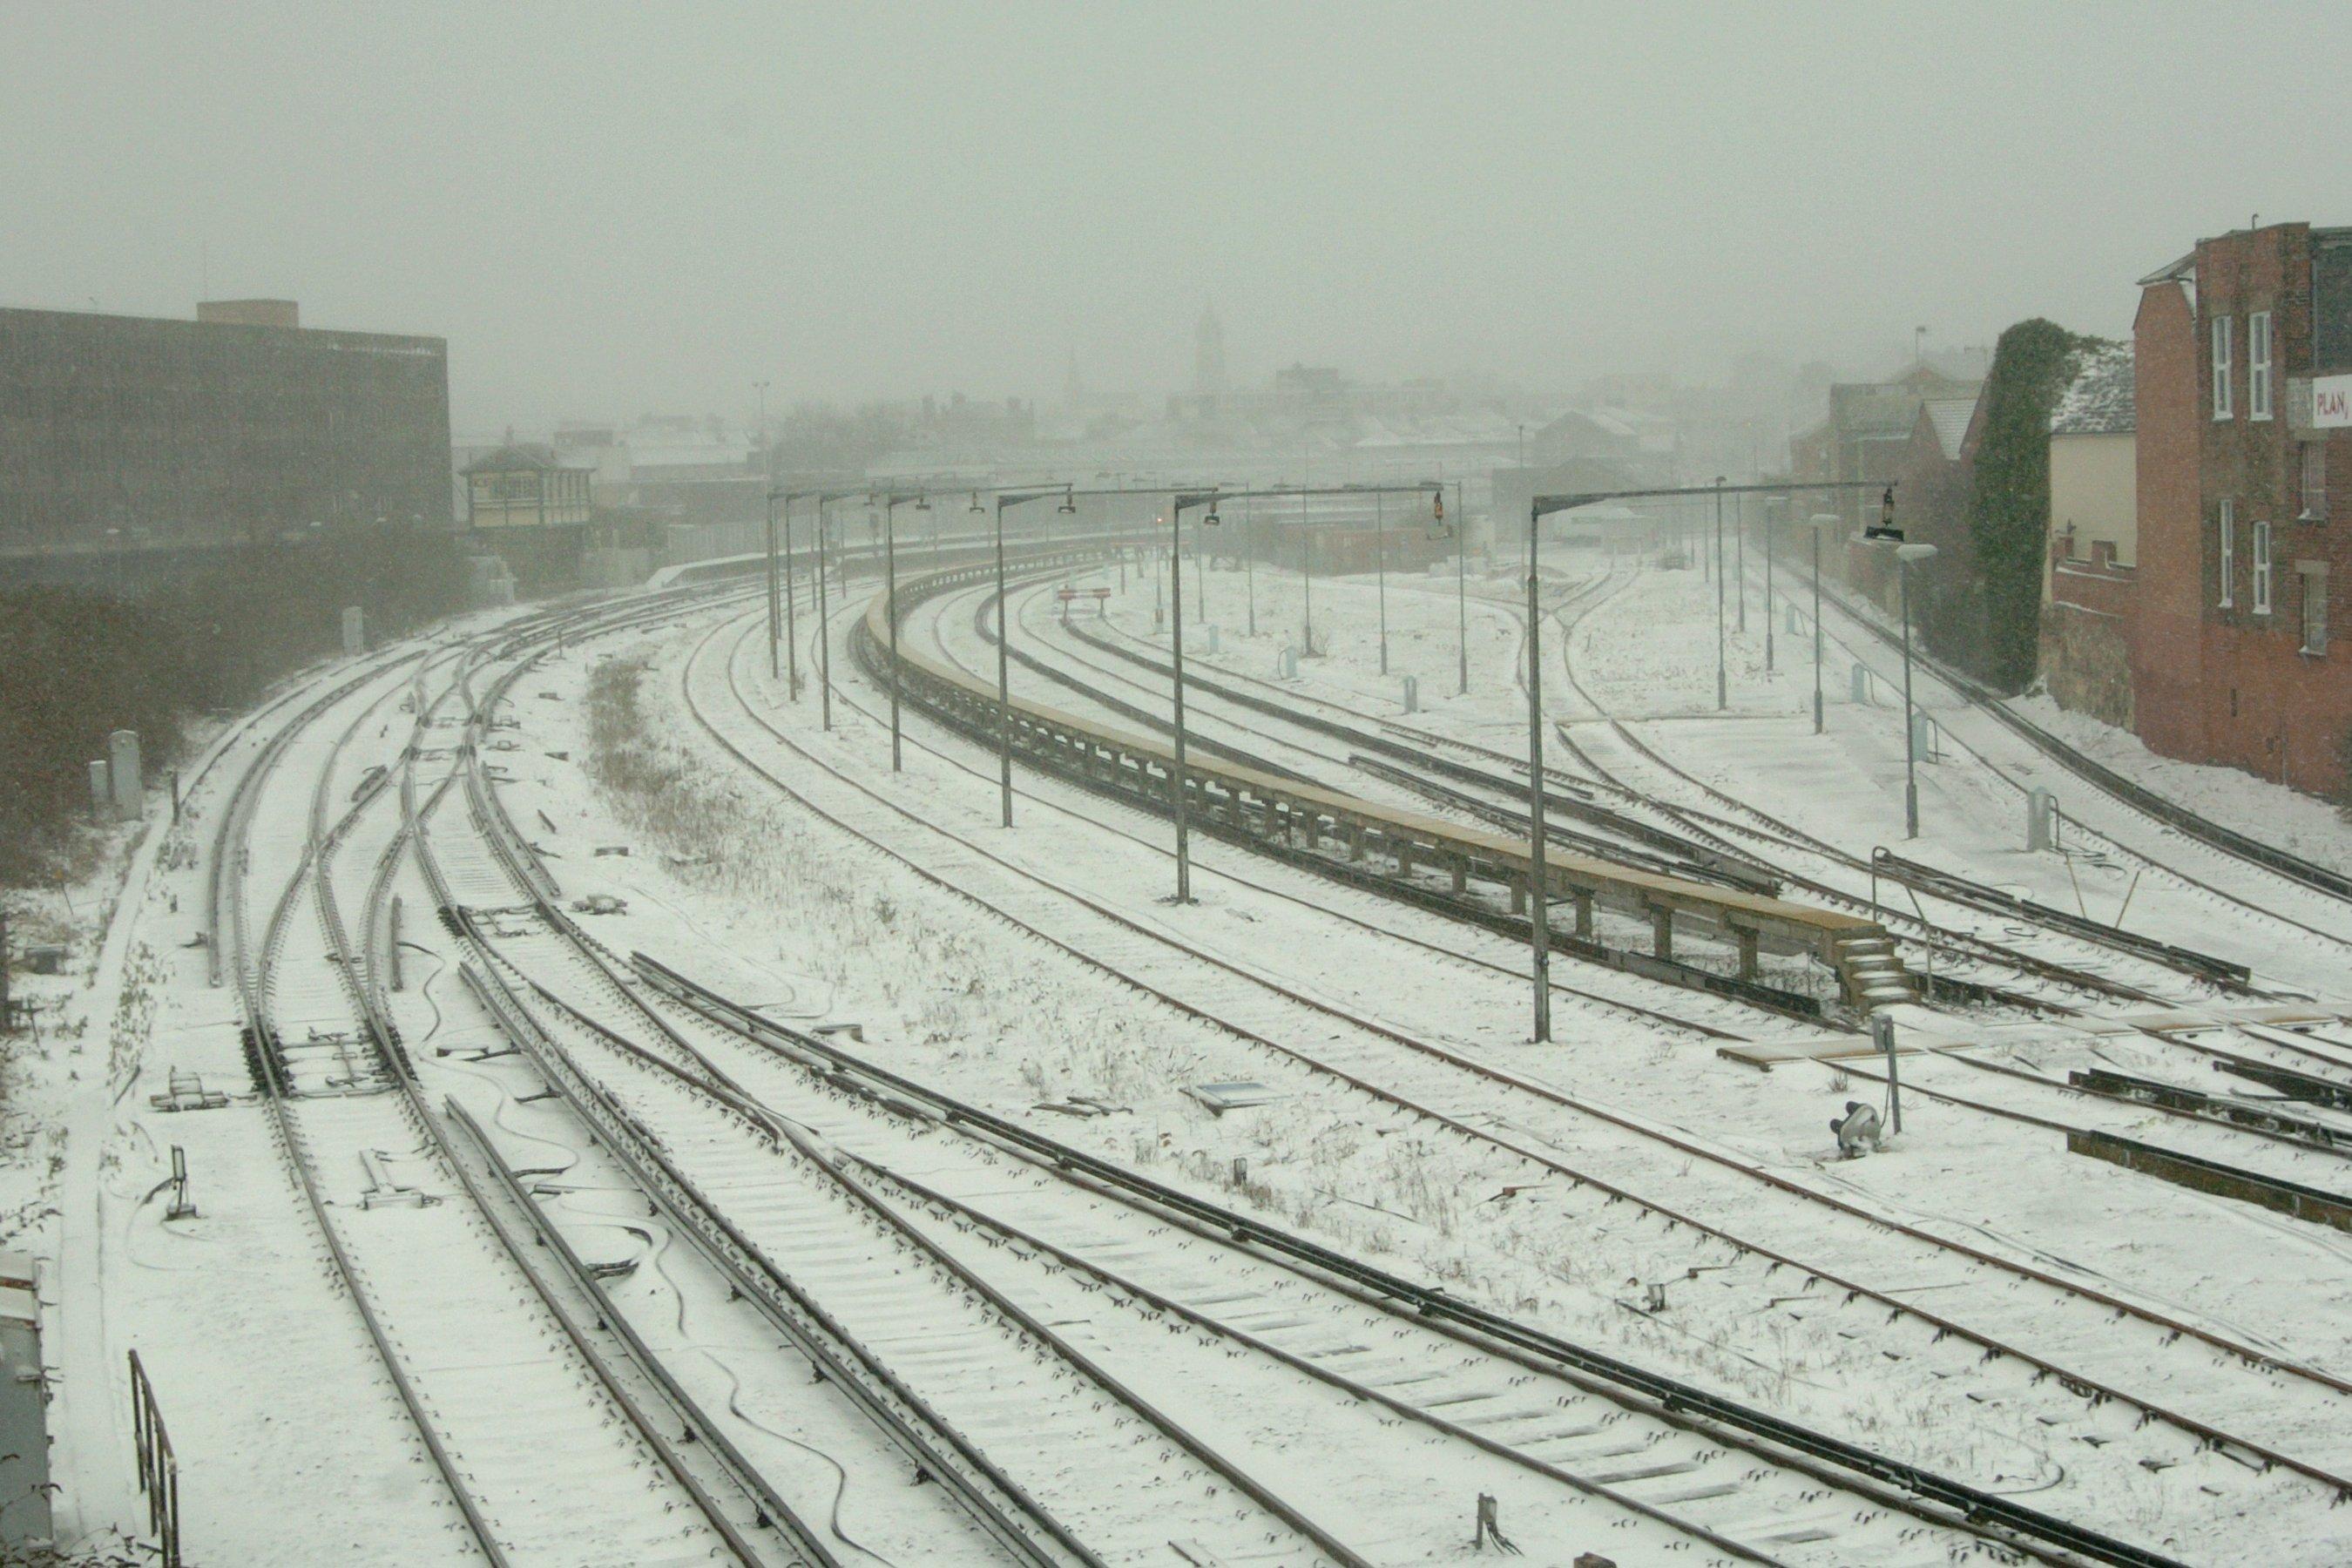 Deserted railway tracks from Eastbourne station in the snow, seen from Whitley Road bridge in March 2013